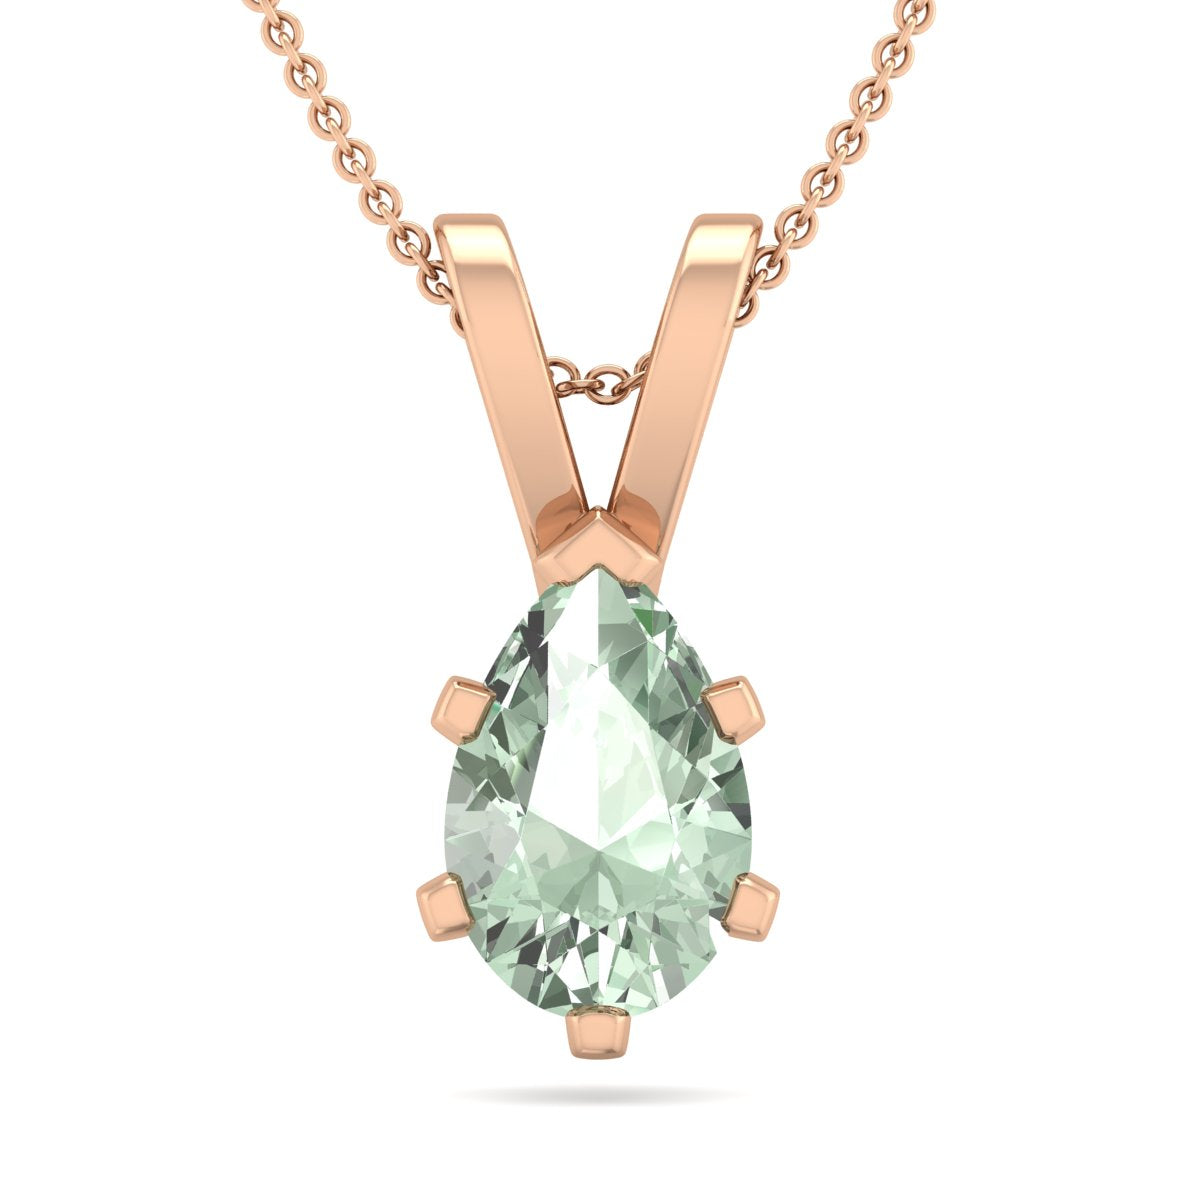 Sselects 3/4 Carat Pear Shape Amethyst Necklace In 14k Rose Gold Over Sterling